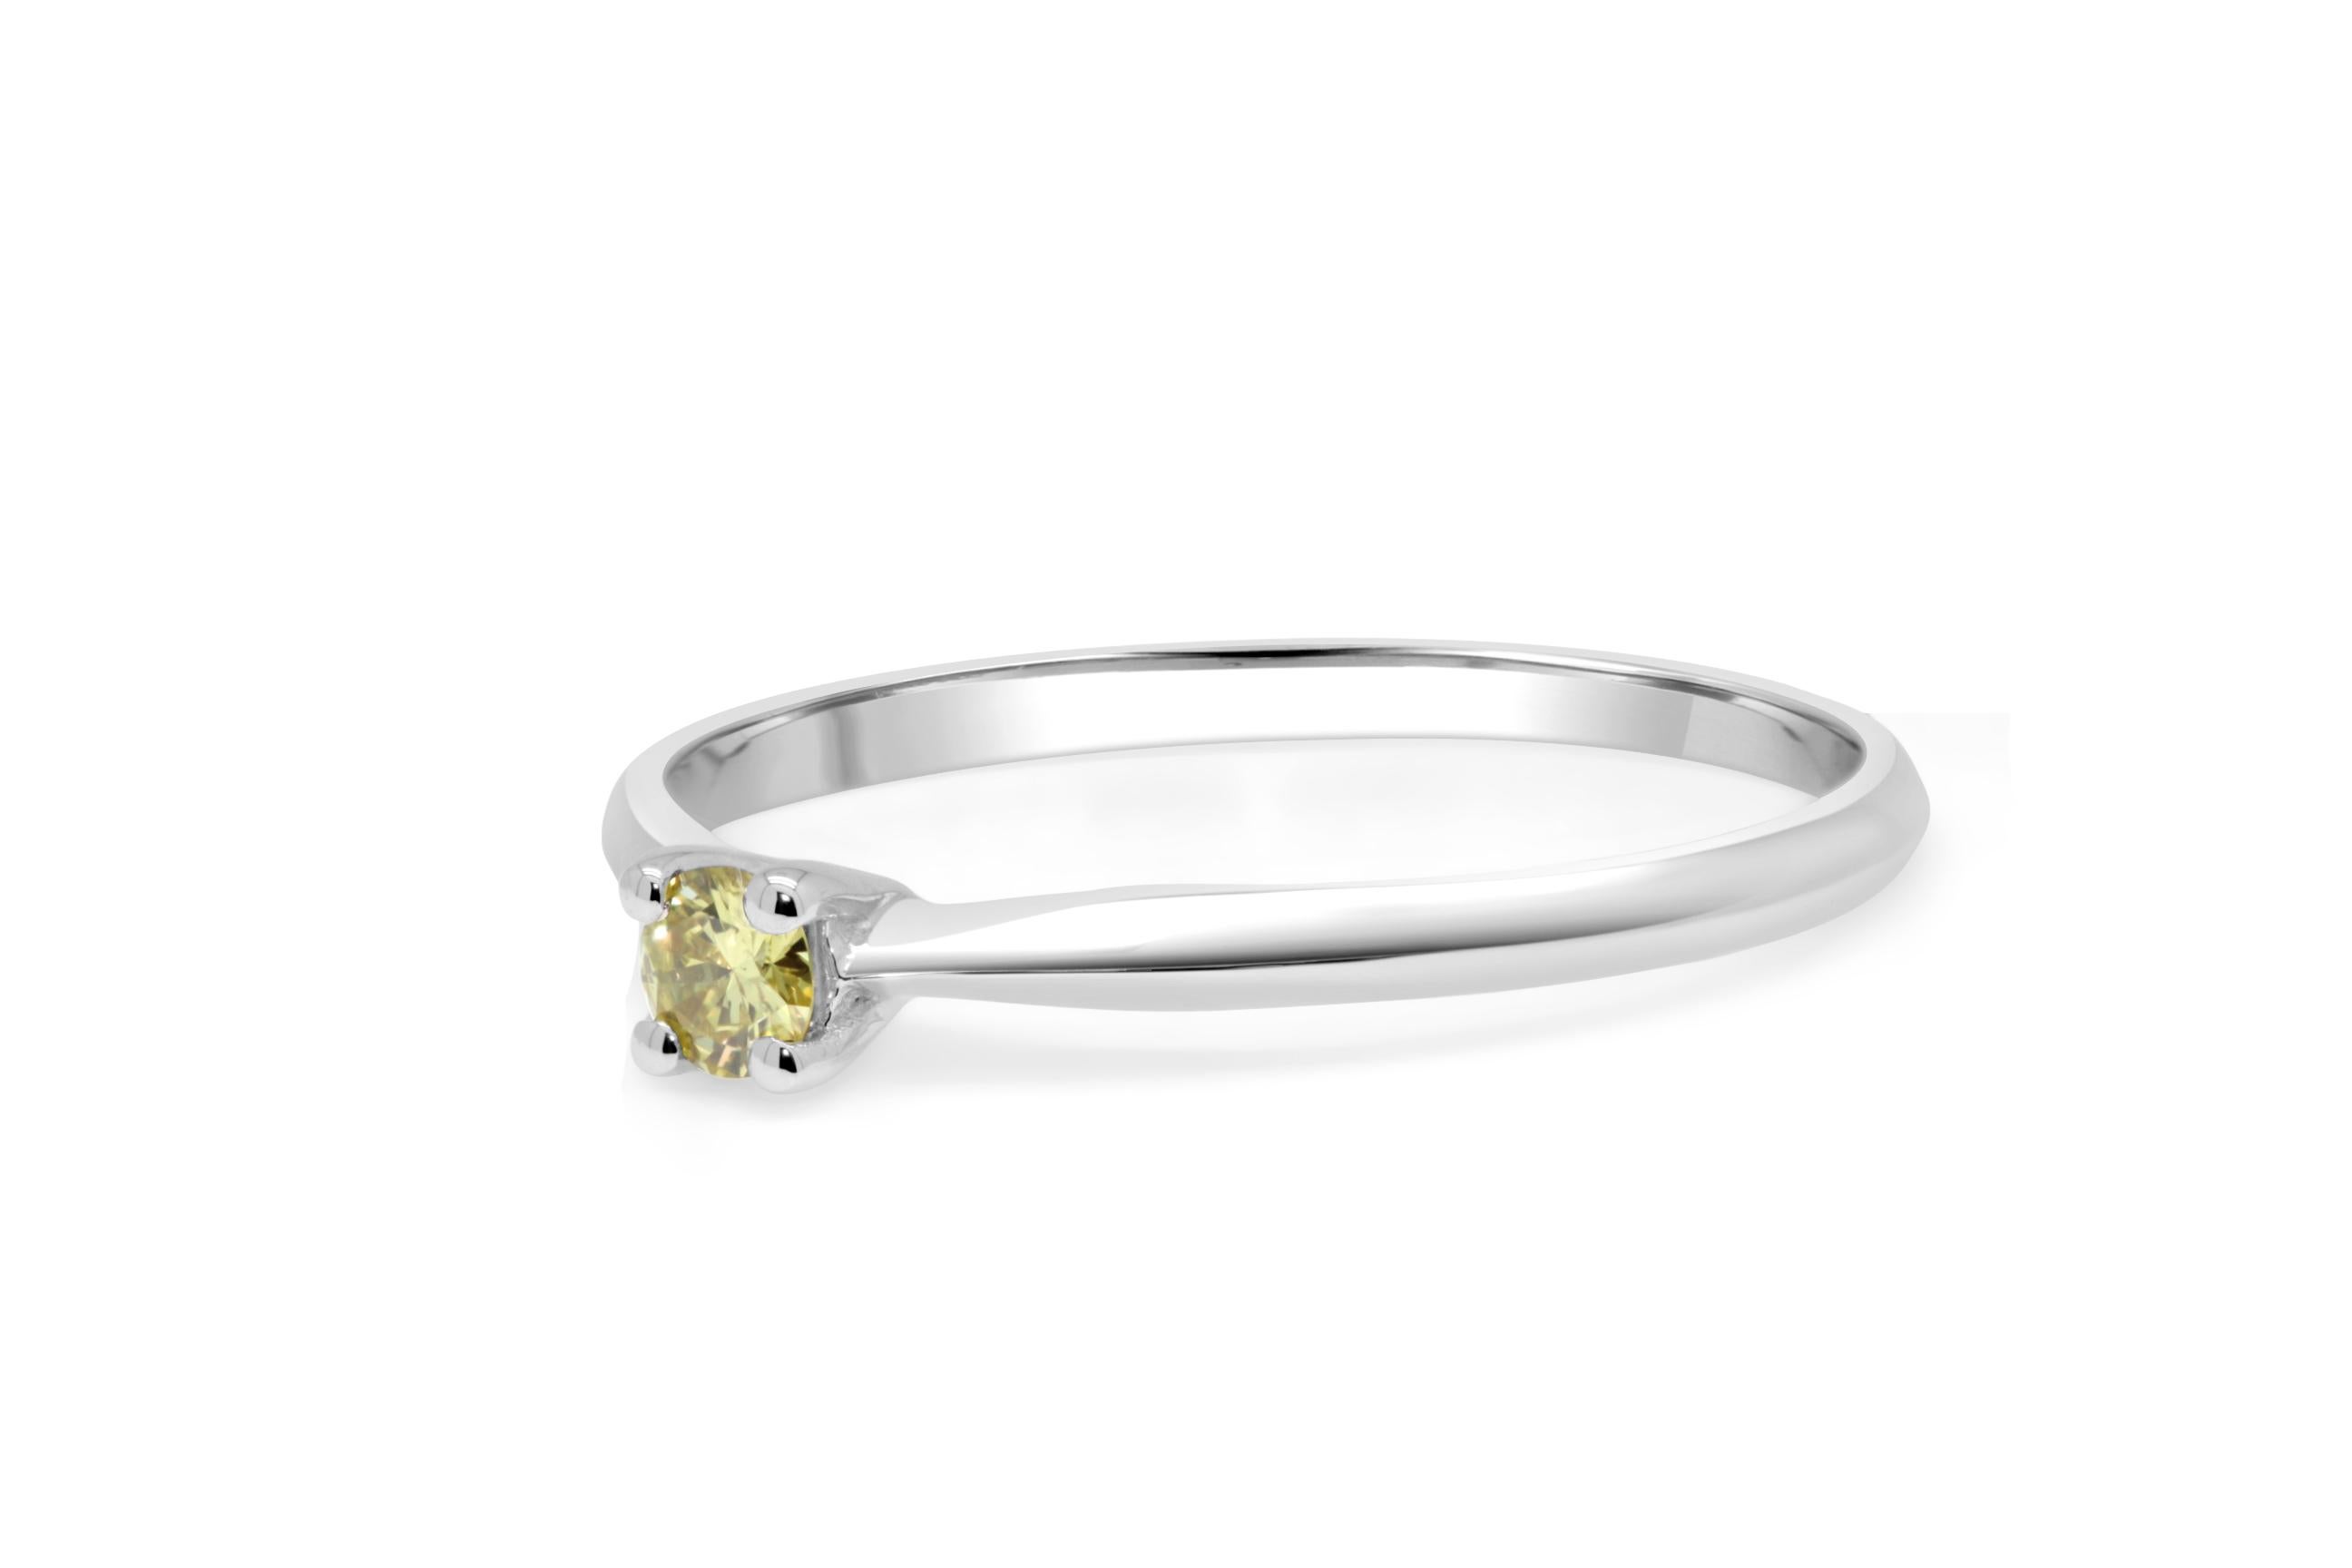 adorable, casual and classy 4 prongs design engagement ring.
a beautiful brilliant cut diamond of 0.09ct set in an 18kt white gold ring.
diamond has a beautiful fancy yellow color and is of VS purity.
can be used as a stack ring as well.
the ring